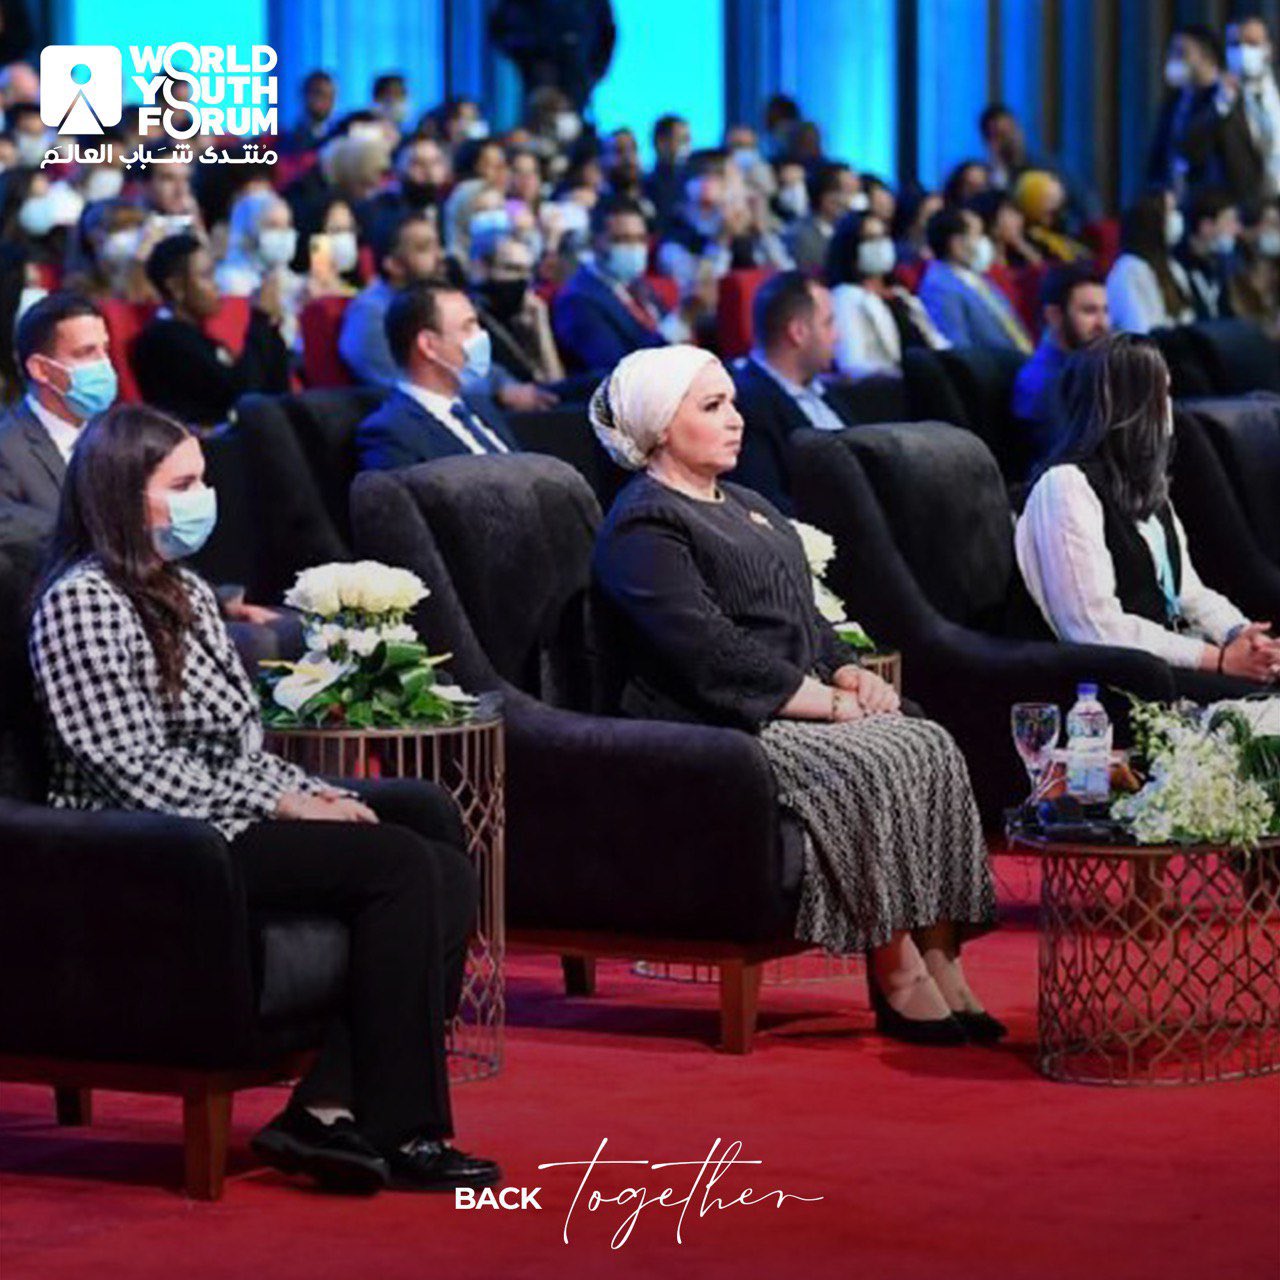 Mrs. Intisar Al-Sisi attended the World Youth Forum